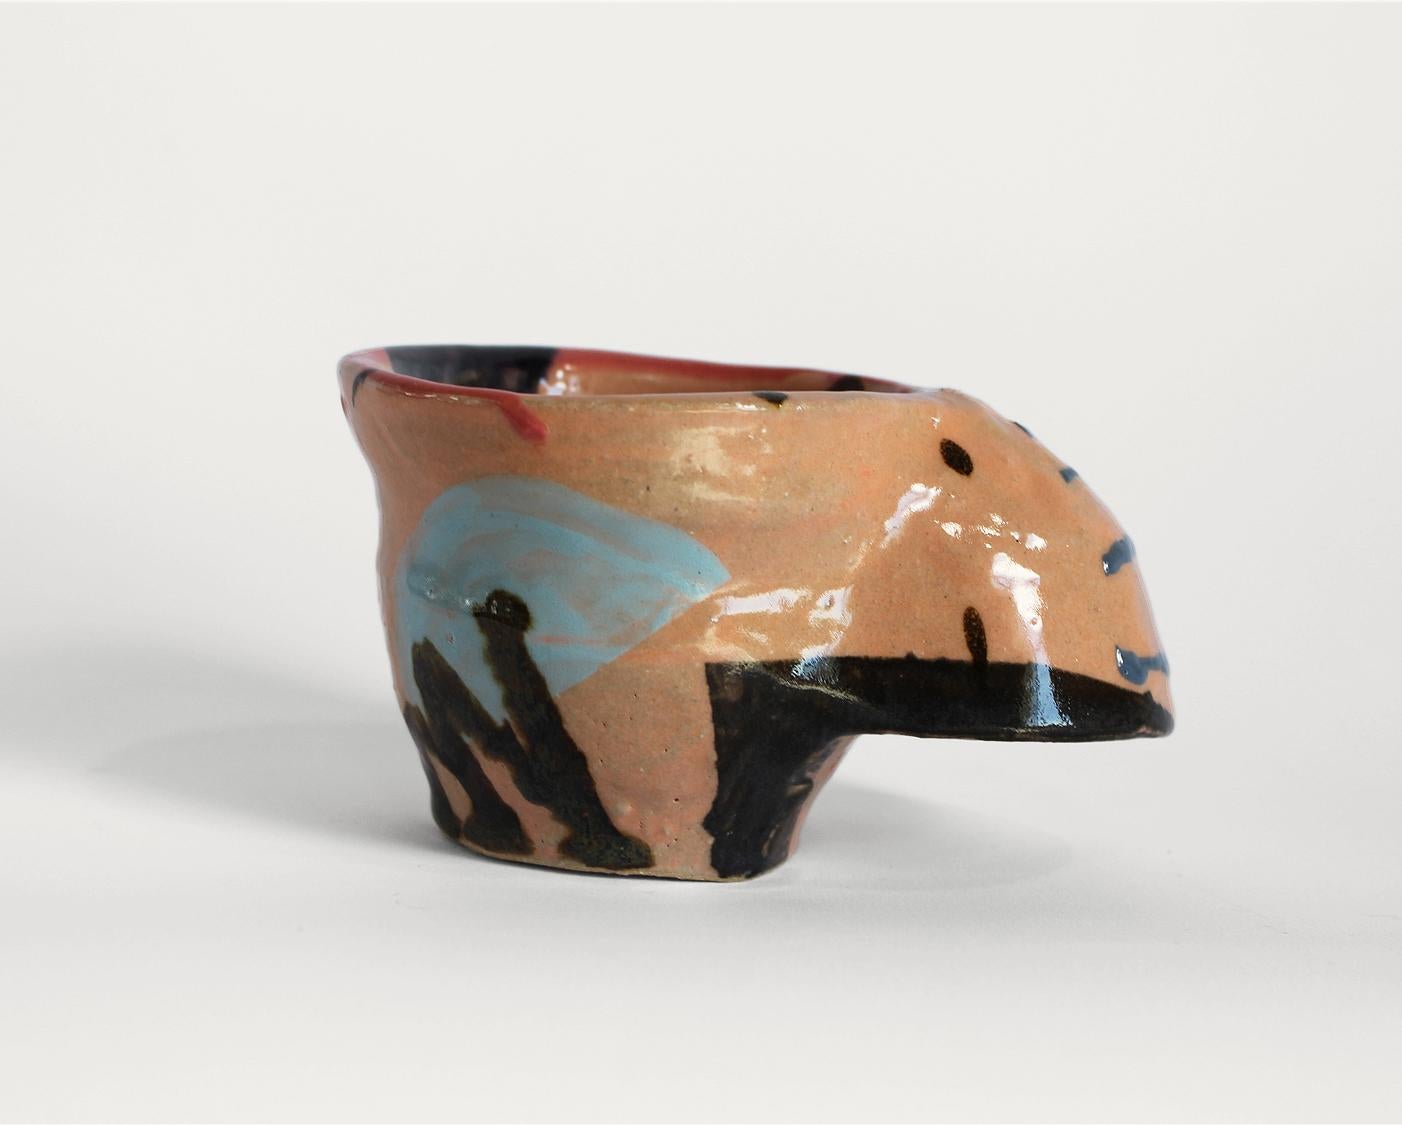 Terre sonore - Shun Kadohashi

Colorful Japanese ceramic cup

16 x 11,5 cm H: 8,5 cm
Sandstone
Made in Japan
Unique piece
2023

This work comes with a certificate of authenticity.

Shun Kadohashi is a Japanese ceramic artist who lives and works in a